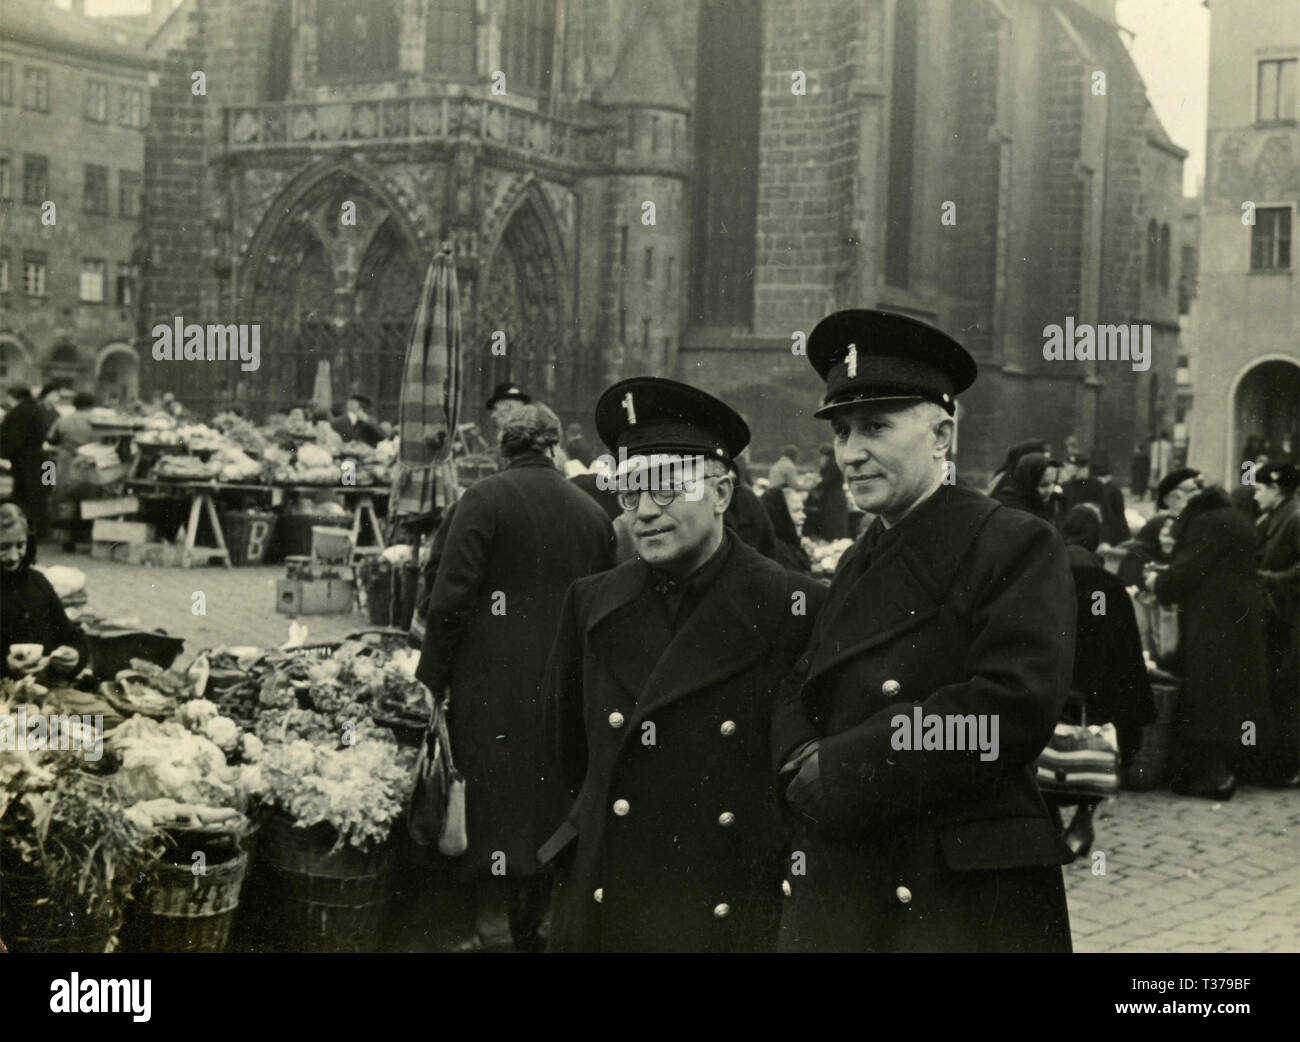 Two man with fascist uniforms at the market, Italy 1930s Stock Photo